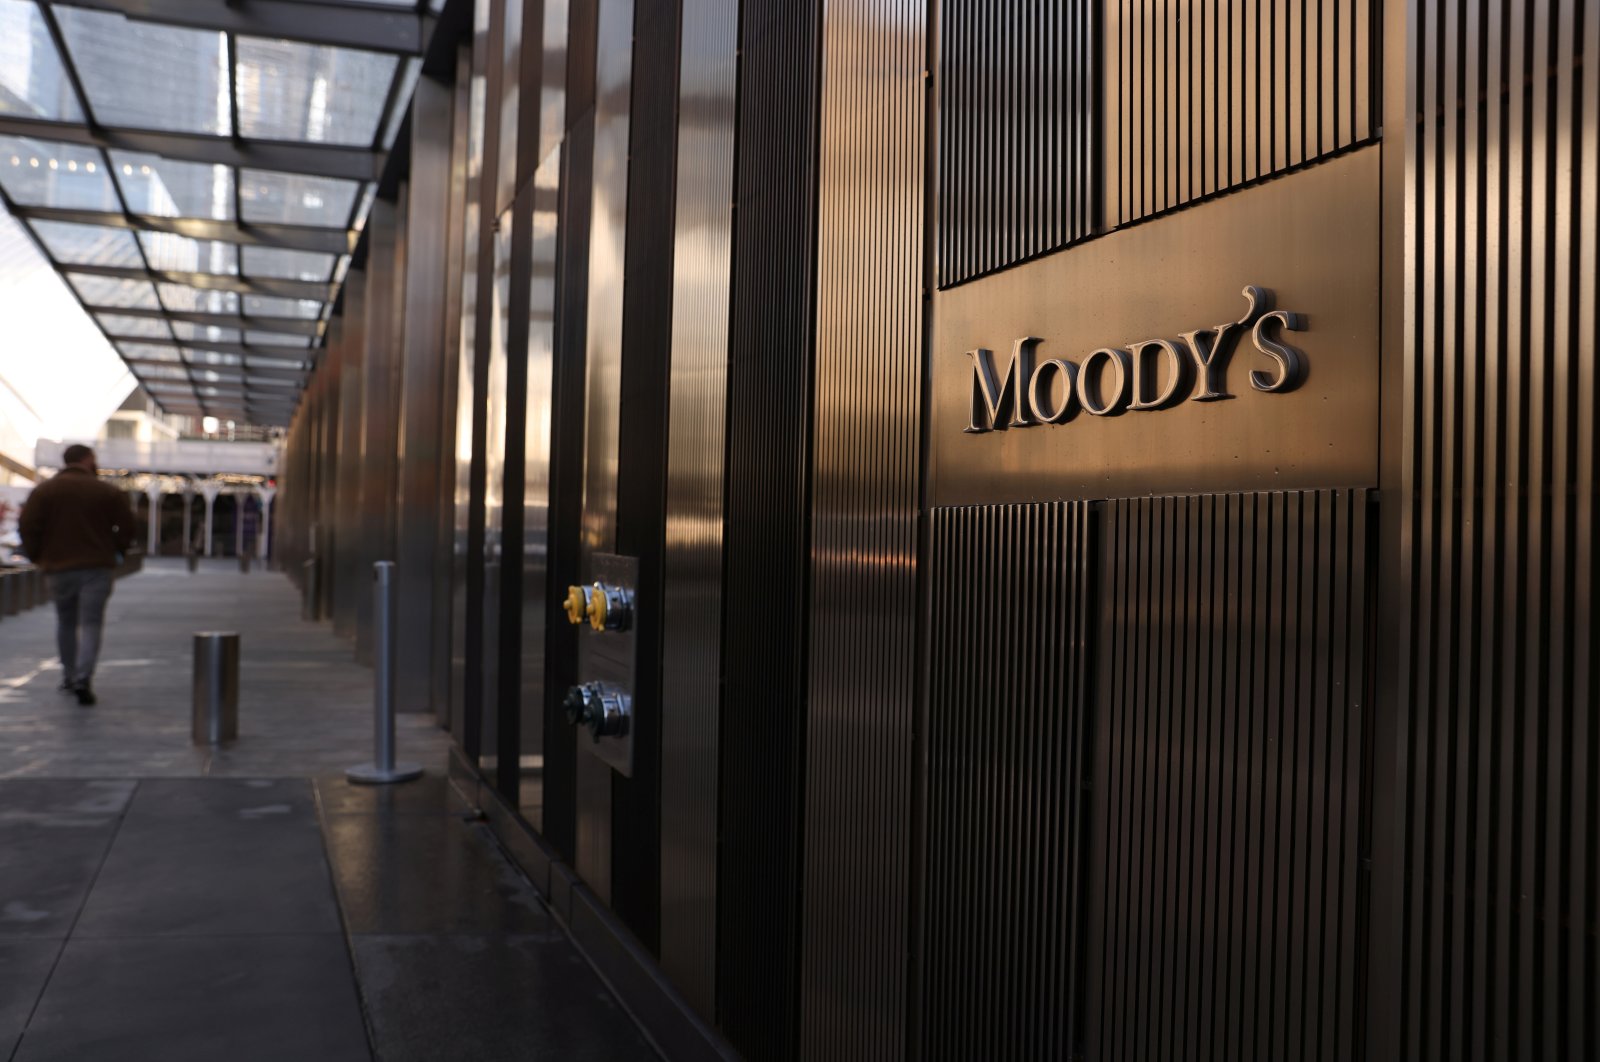 Türkiye’s policy pivot ‘clearly’ positive for credit rating: Moody’s